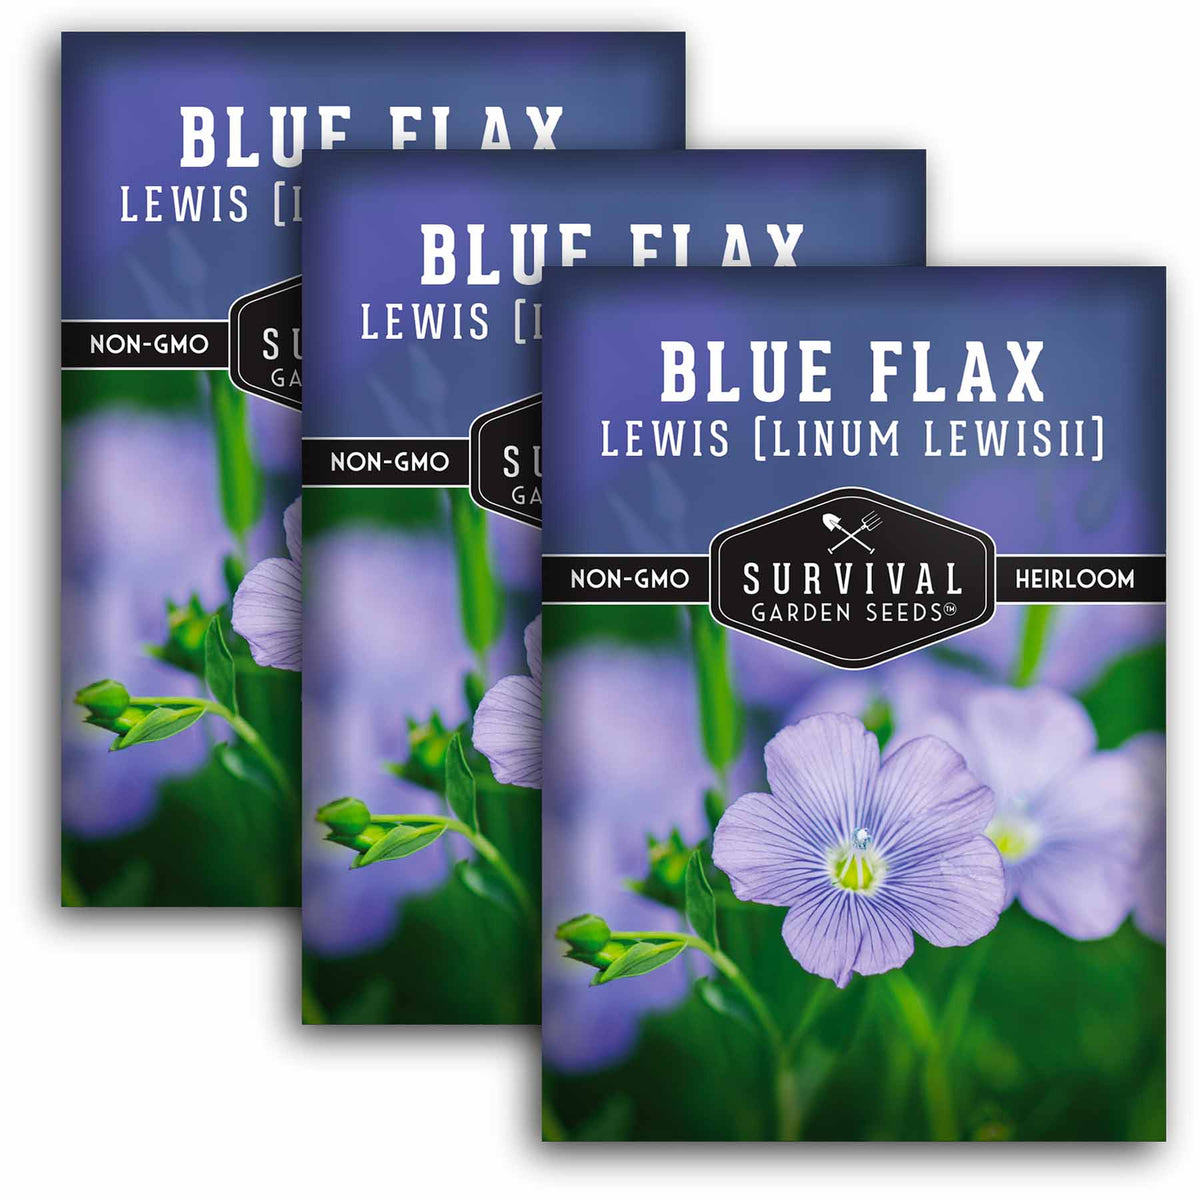 3 Packet of Lewis Blue Flax seeds